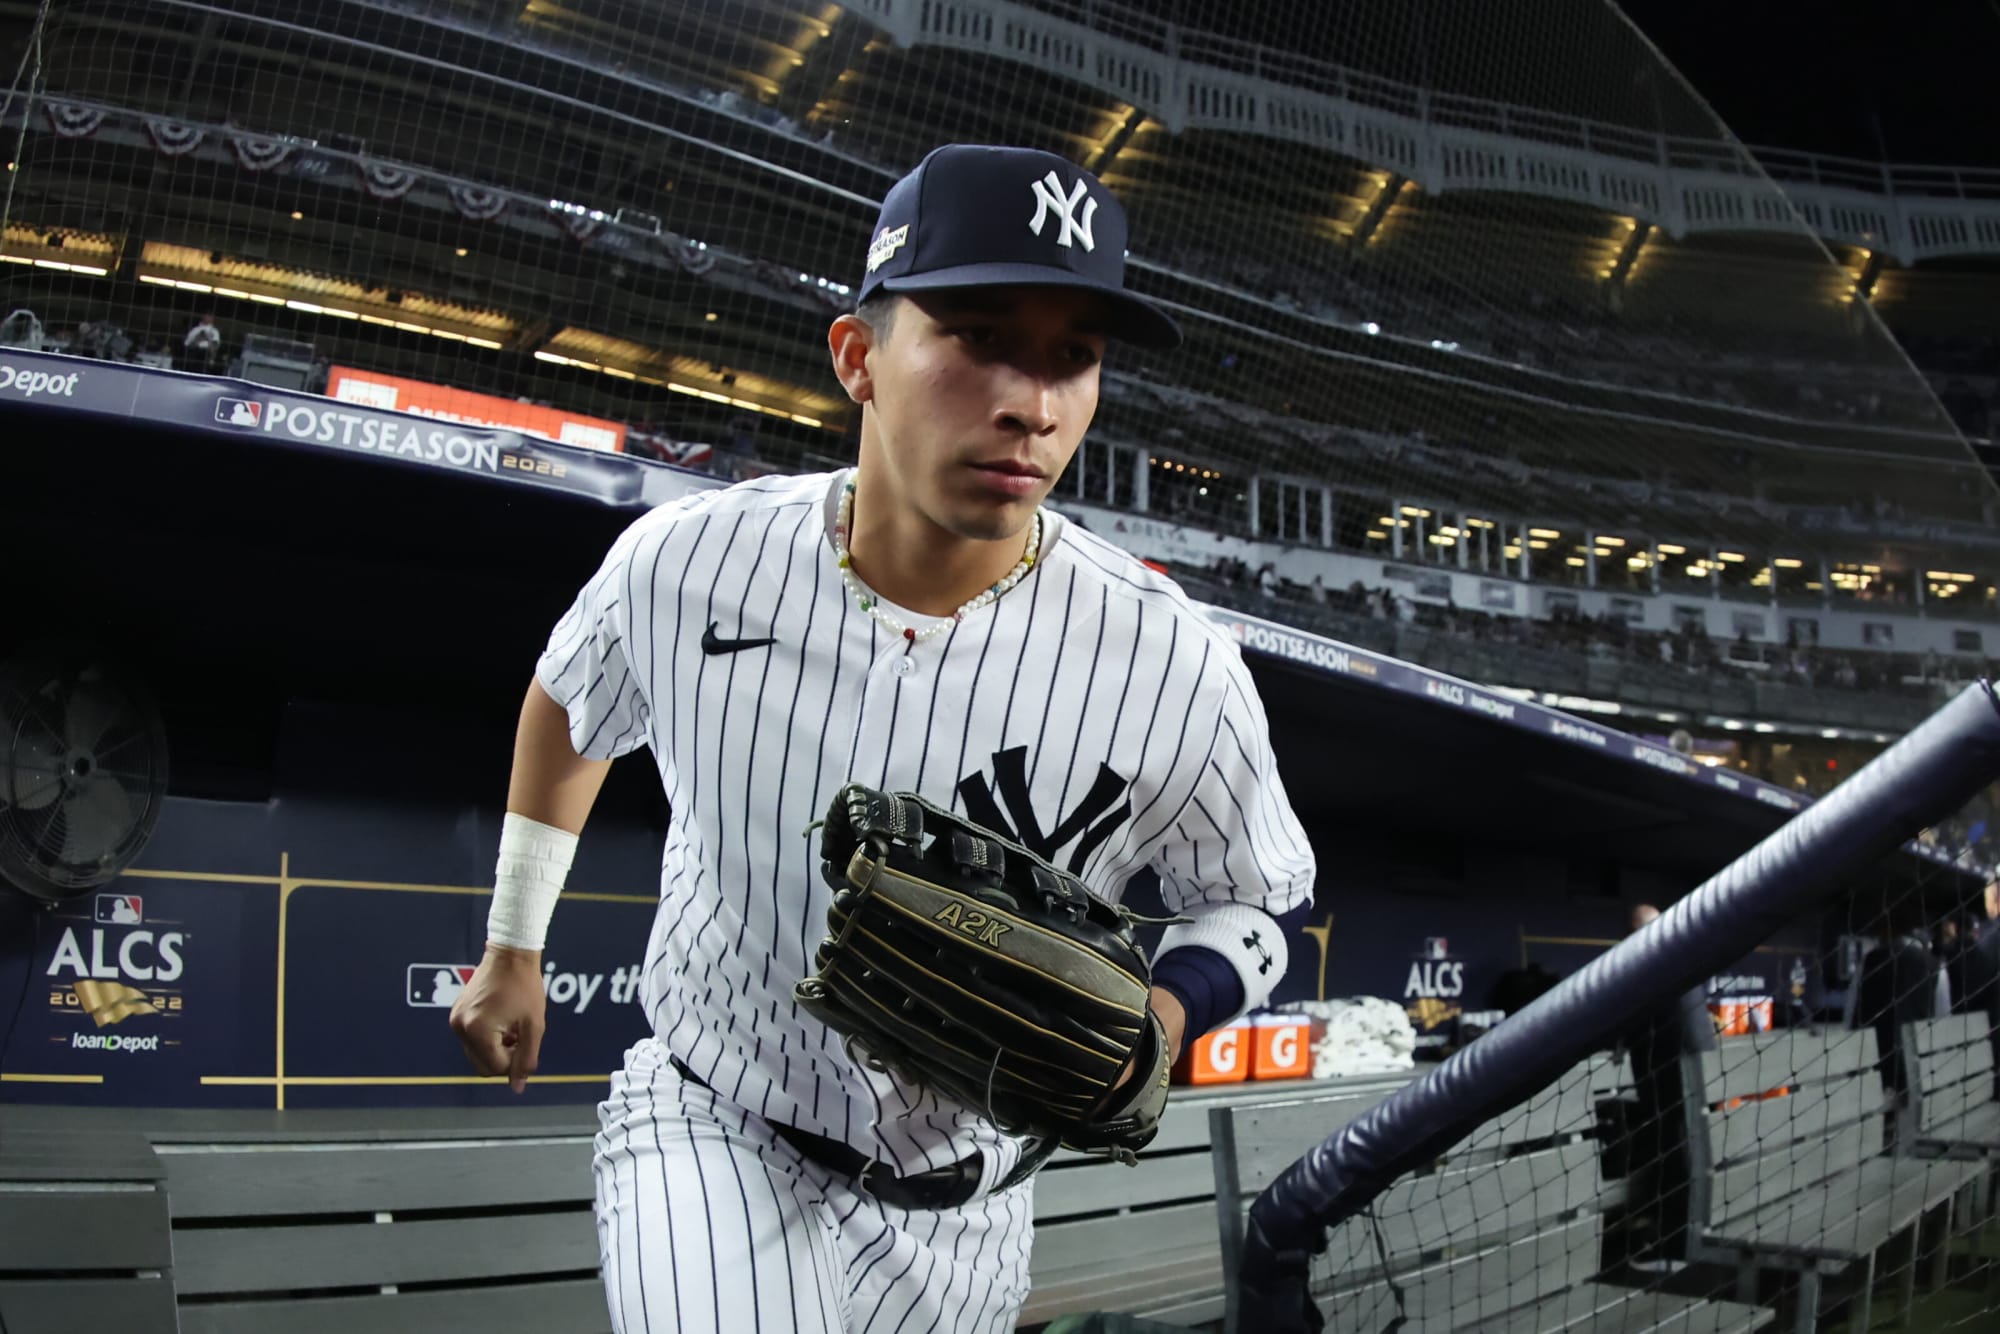 Left field could be Oswaldo Cabrera's path to New York Yankees lineup